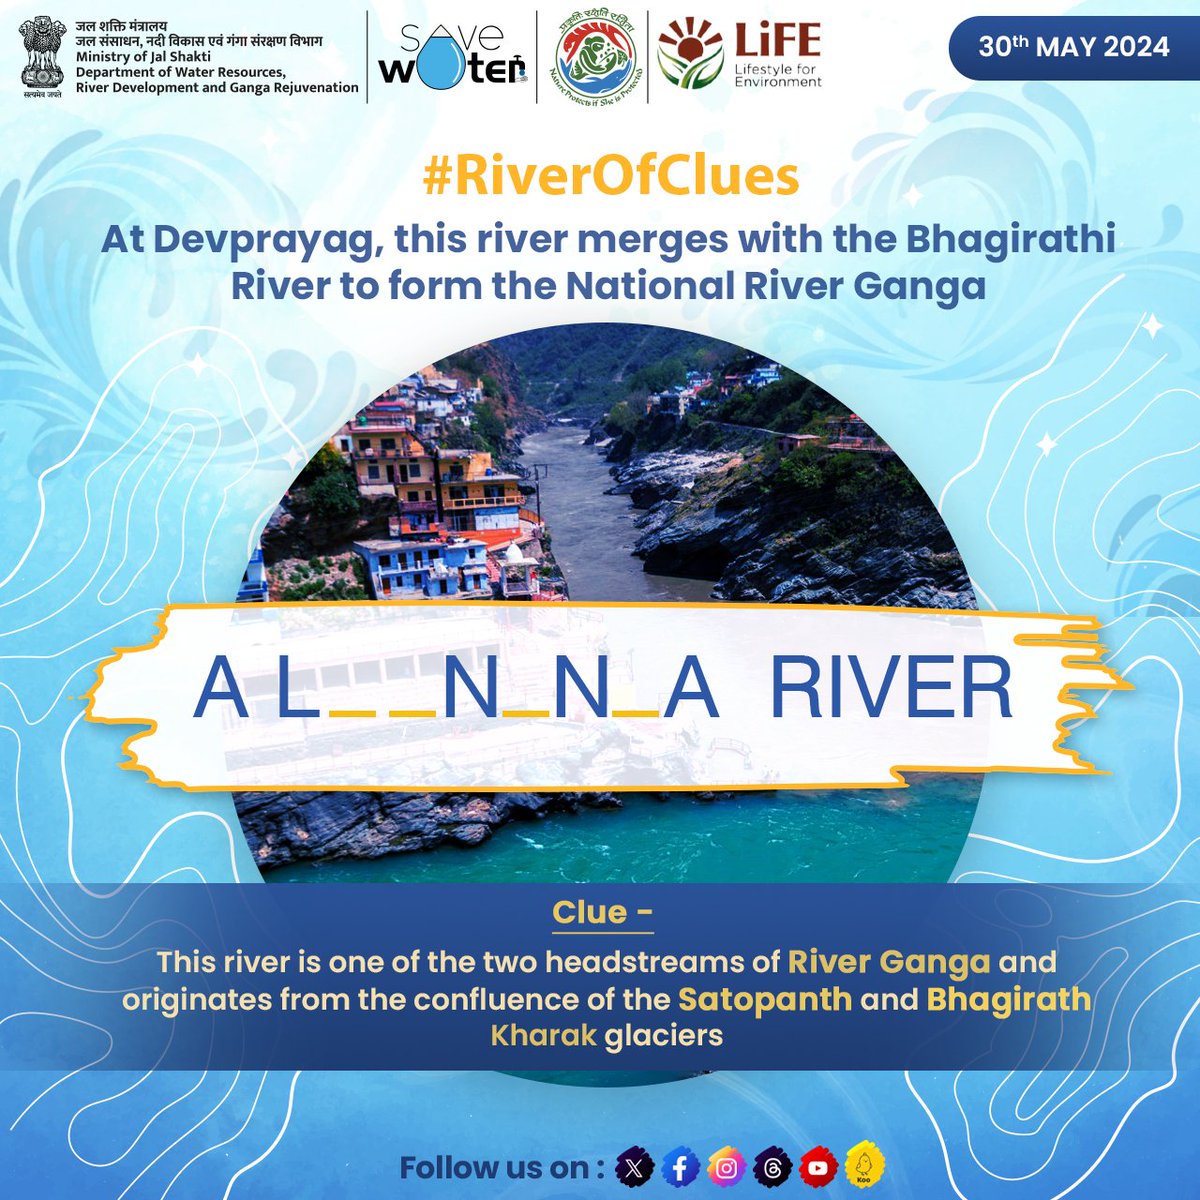 Get ready for #RiverOfClues! We're diving into the remarkable ways @DoWRRDGR_MoJS is revitalizing India's waterways under #NamamiGange. Unravel the hints, uncover the groundbreaking projects, and witness the transformation. Join us on a journey of discovery. #JalShakti #DoWR